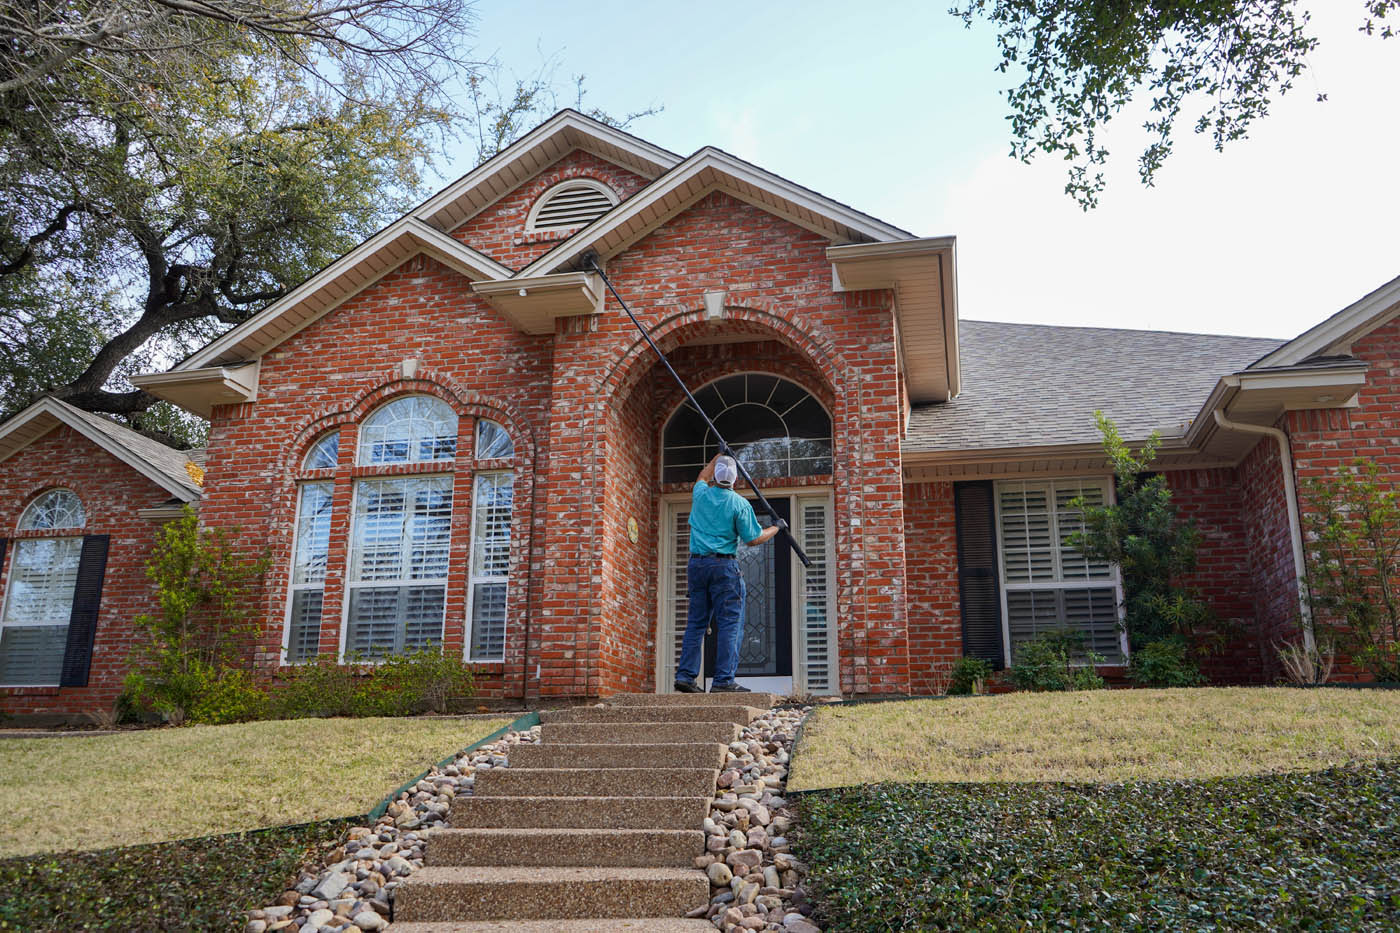 A GGA Pest Management technician inspecting a brick red house, contact us for a residential exterminator in Temple, TX.